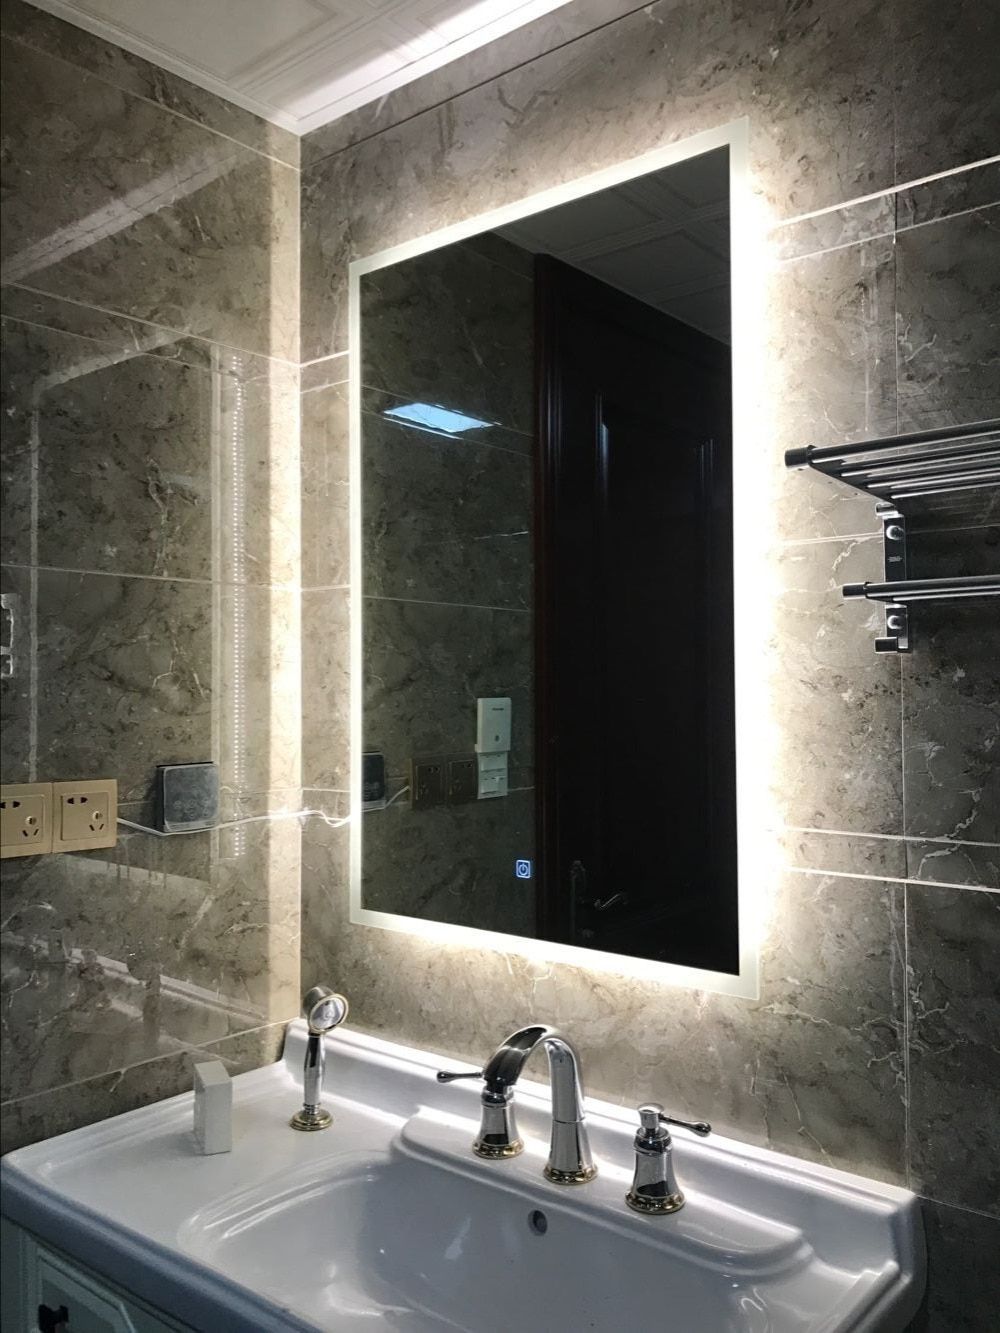 [%us $180.0 10% Off|box Diffusers Led Backlit Bathroom Mirror Vanity Square  Wall Mount Bathroom Finger Touch Light Mirror Bath Mirrors In Bath Mirrors Inside Trendy Backlit Wall Mirrors|backlit Wall Mirrors With Famous Us $180.0 10% Off|box Diffusers Led Backlit Bathroom Mirror Vanity Square  Wall Mount Bathroom Finger Touch Light Mirror Bath Mirrors In Bath Mirrors|most Up To Date Backlit Wall Mirrors Within Us $180.0 10% Off|box Diffusers Led Backlit Bathroom Mirror Vanity Square  Wall Mount Bathroom Finger Touch Light Mirror Bath Mirrors In Bath Mirrors|2020 Us $ (View 4 of 20)